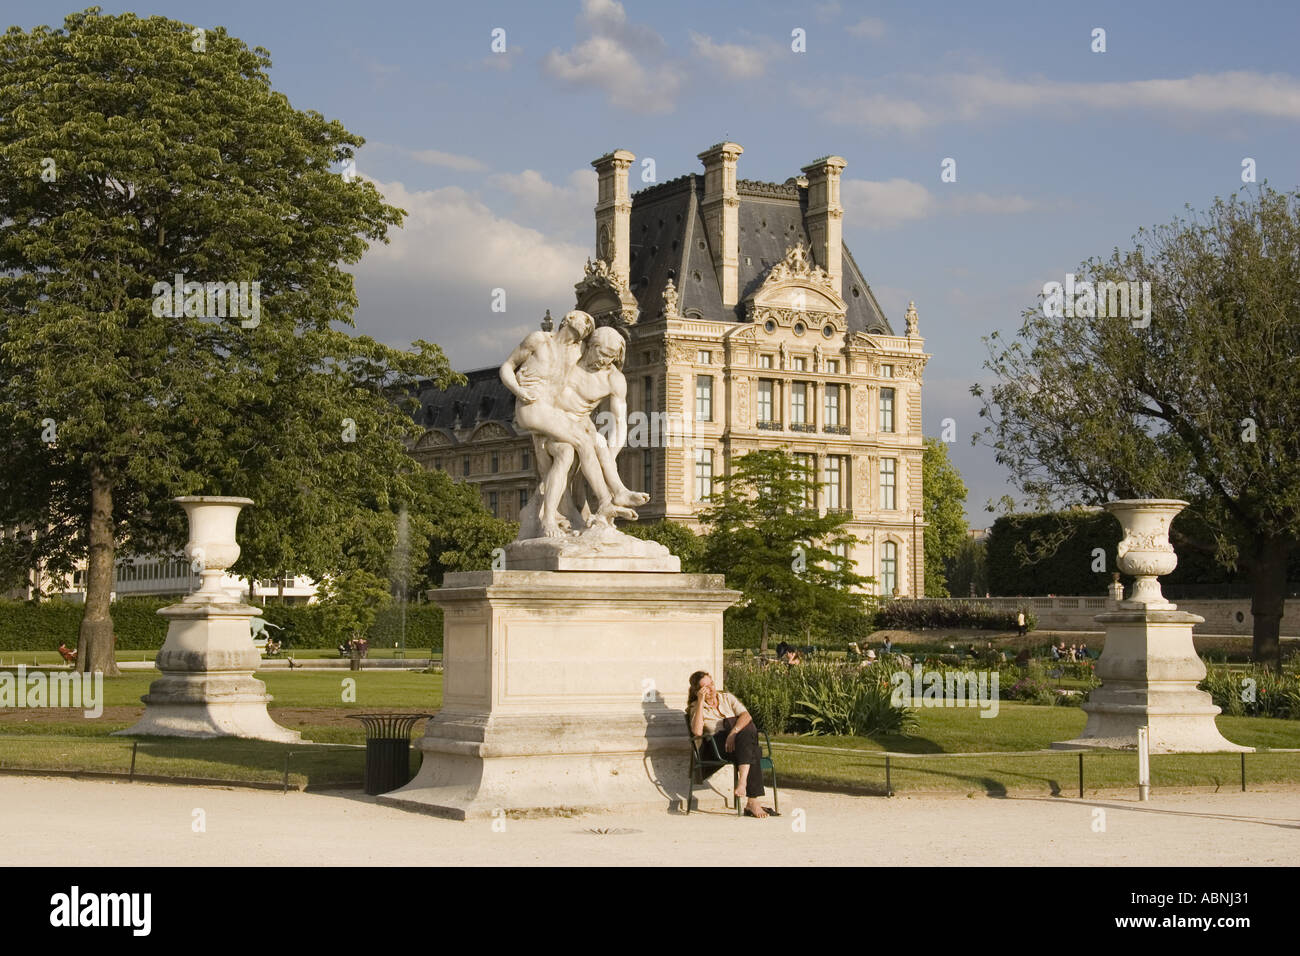 Woman With Bare Feet Sits Near Statue At Jardin Des Tuileries